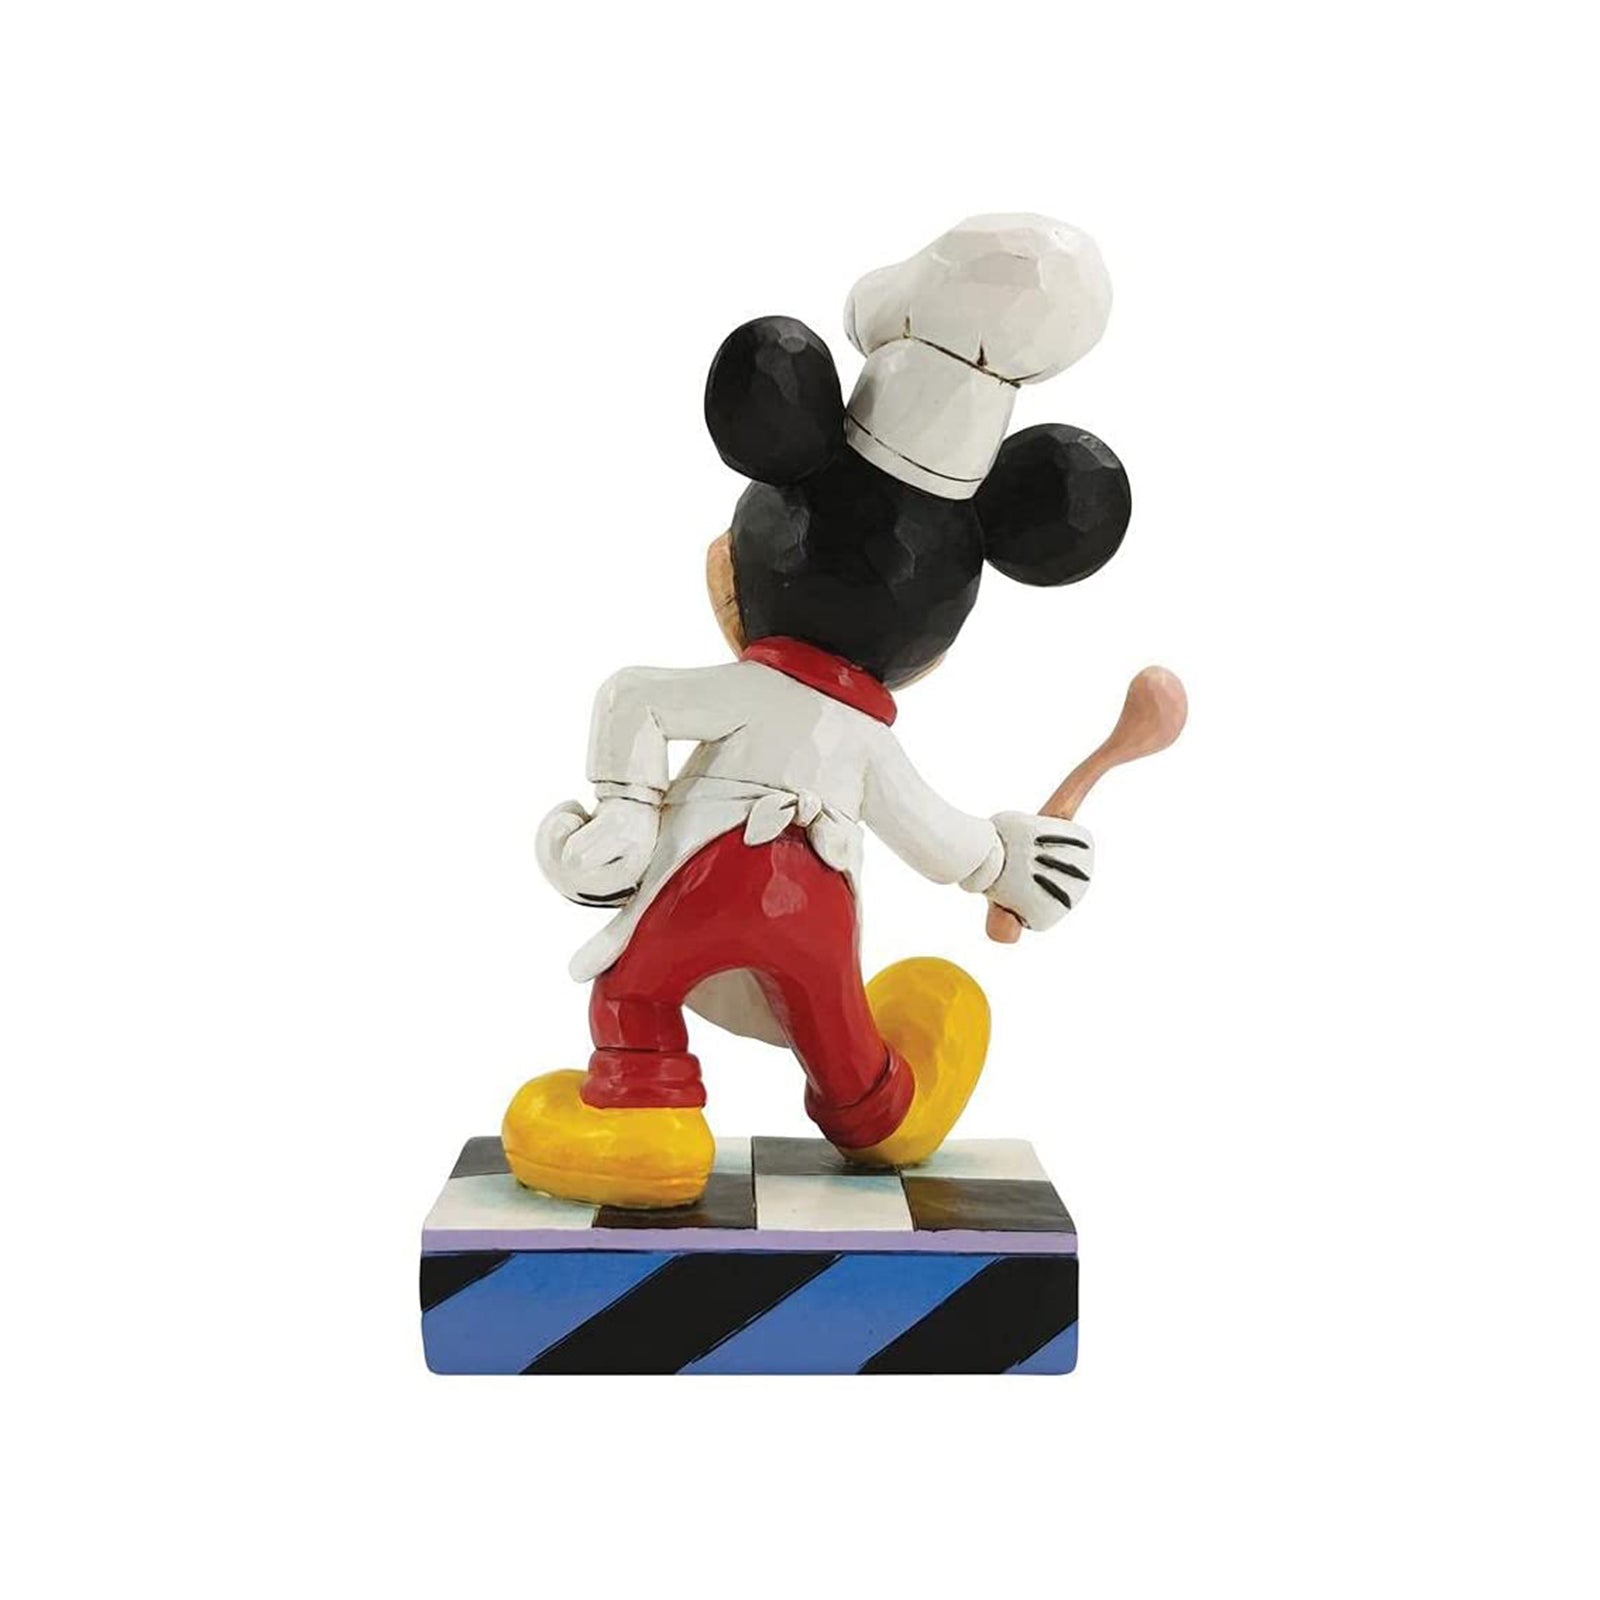 Enesco Disney Traditions Mickey & Minnie Mouse Terrifying Trick-or